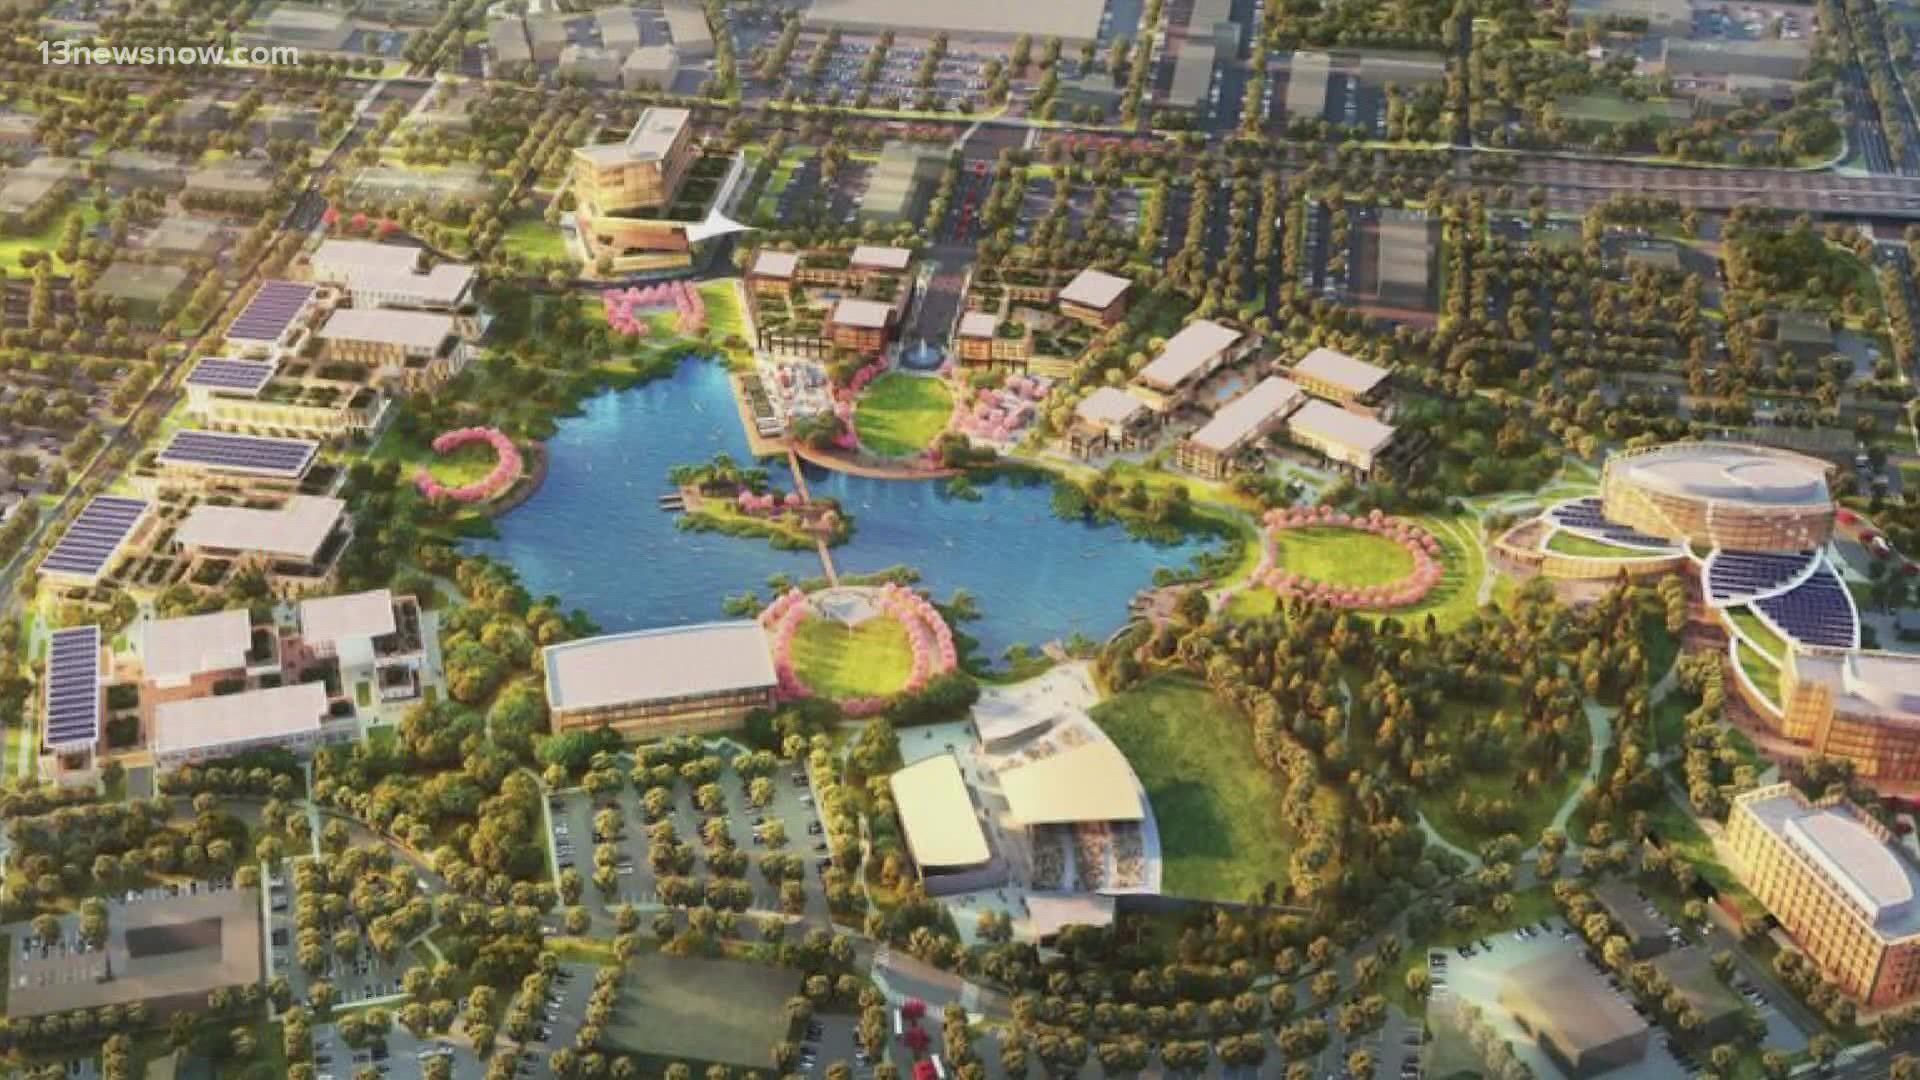 NFL Hall of Fame running back Emmitt Smith is a part of Crossroads Partnership, hoping to redevelop the mall. Norfolk MC Associates also shared its plans.